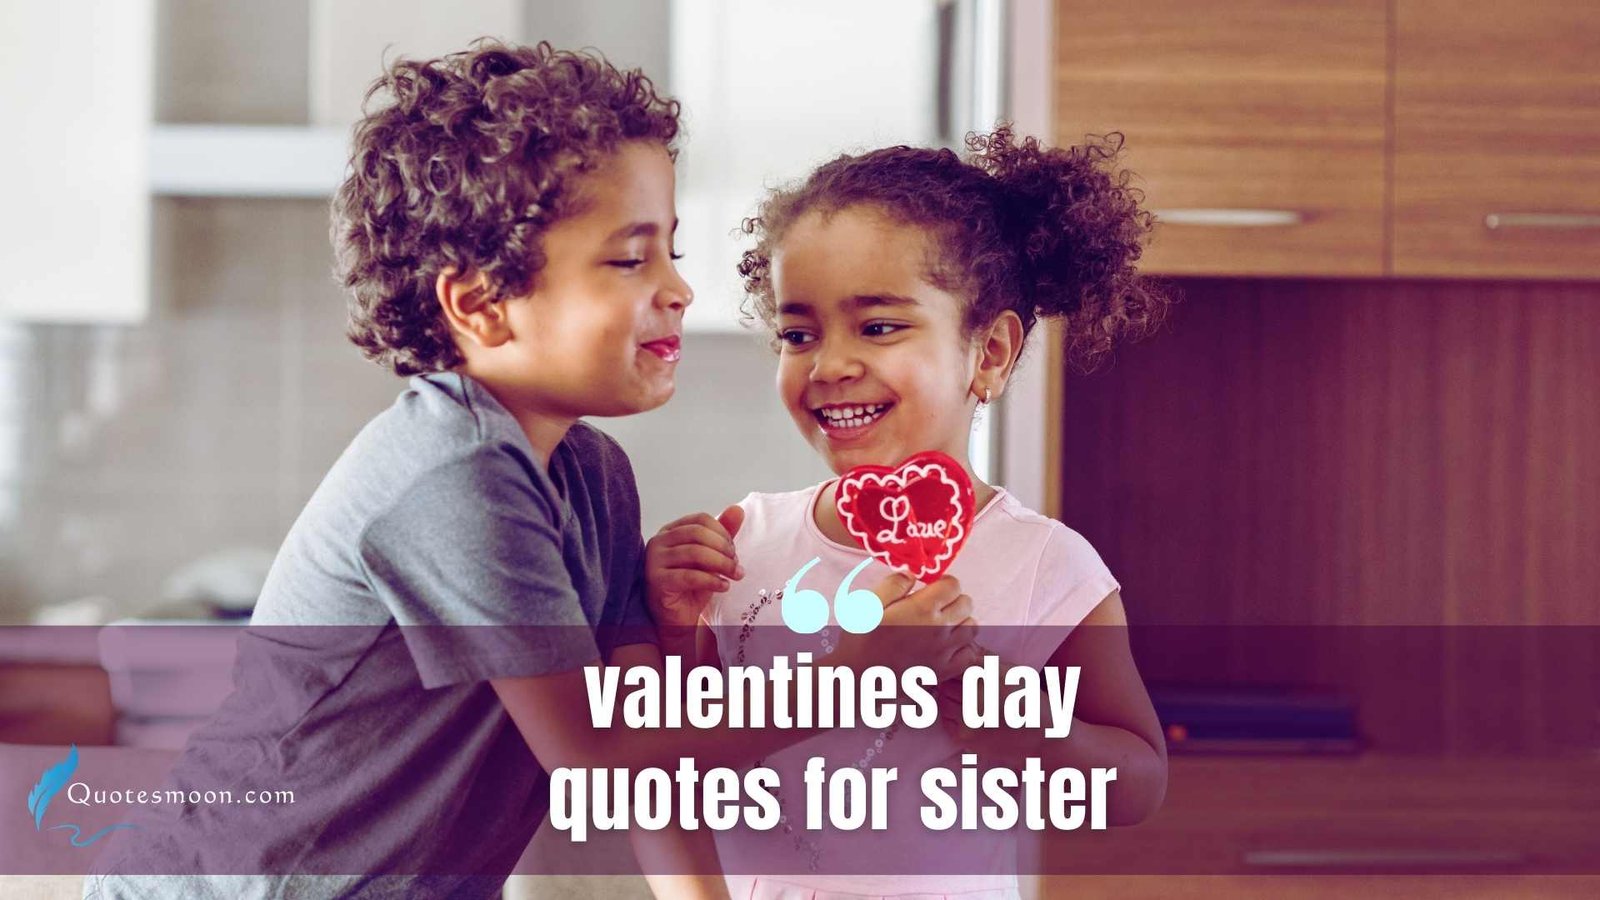 valentines day quotes for sister images